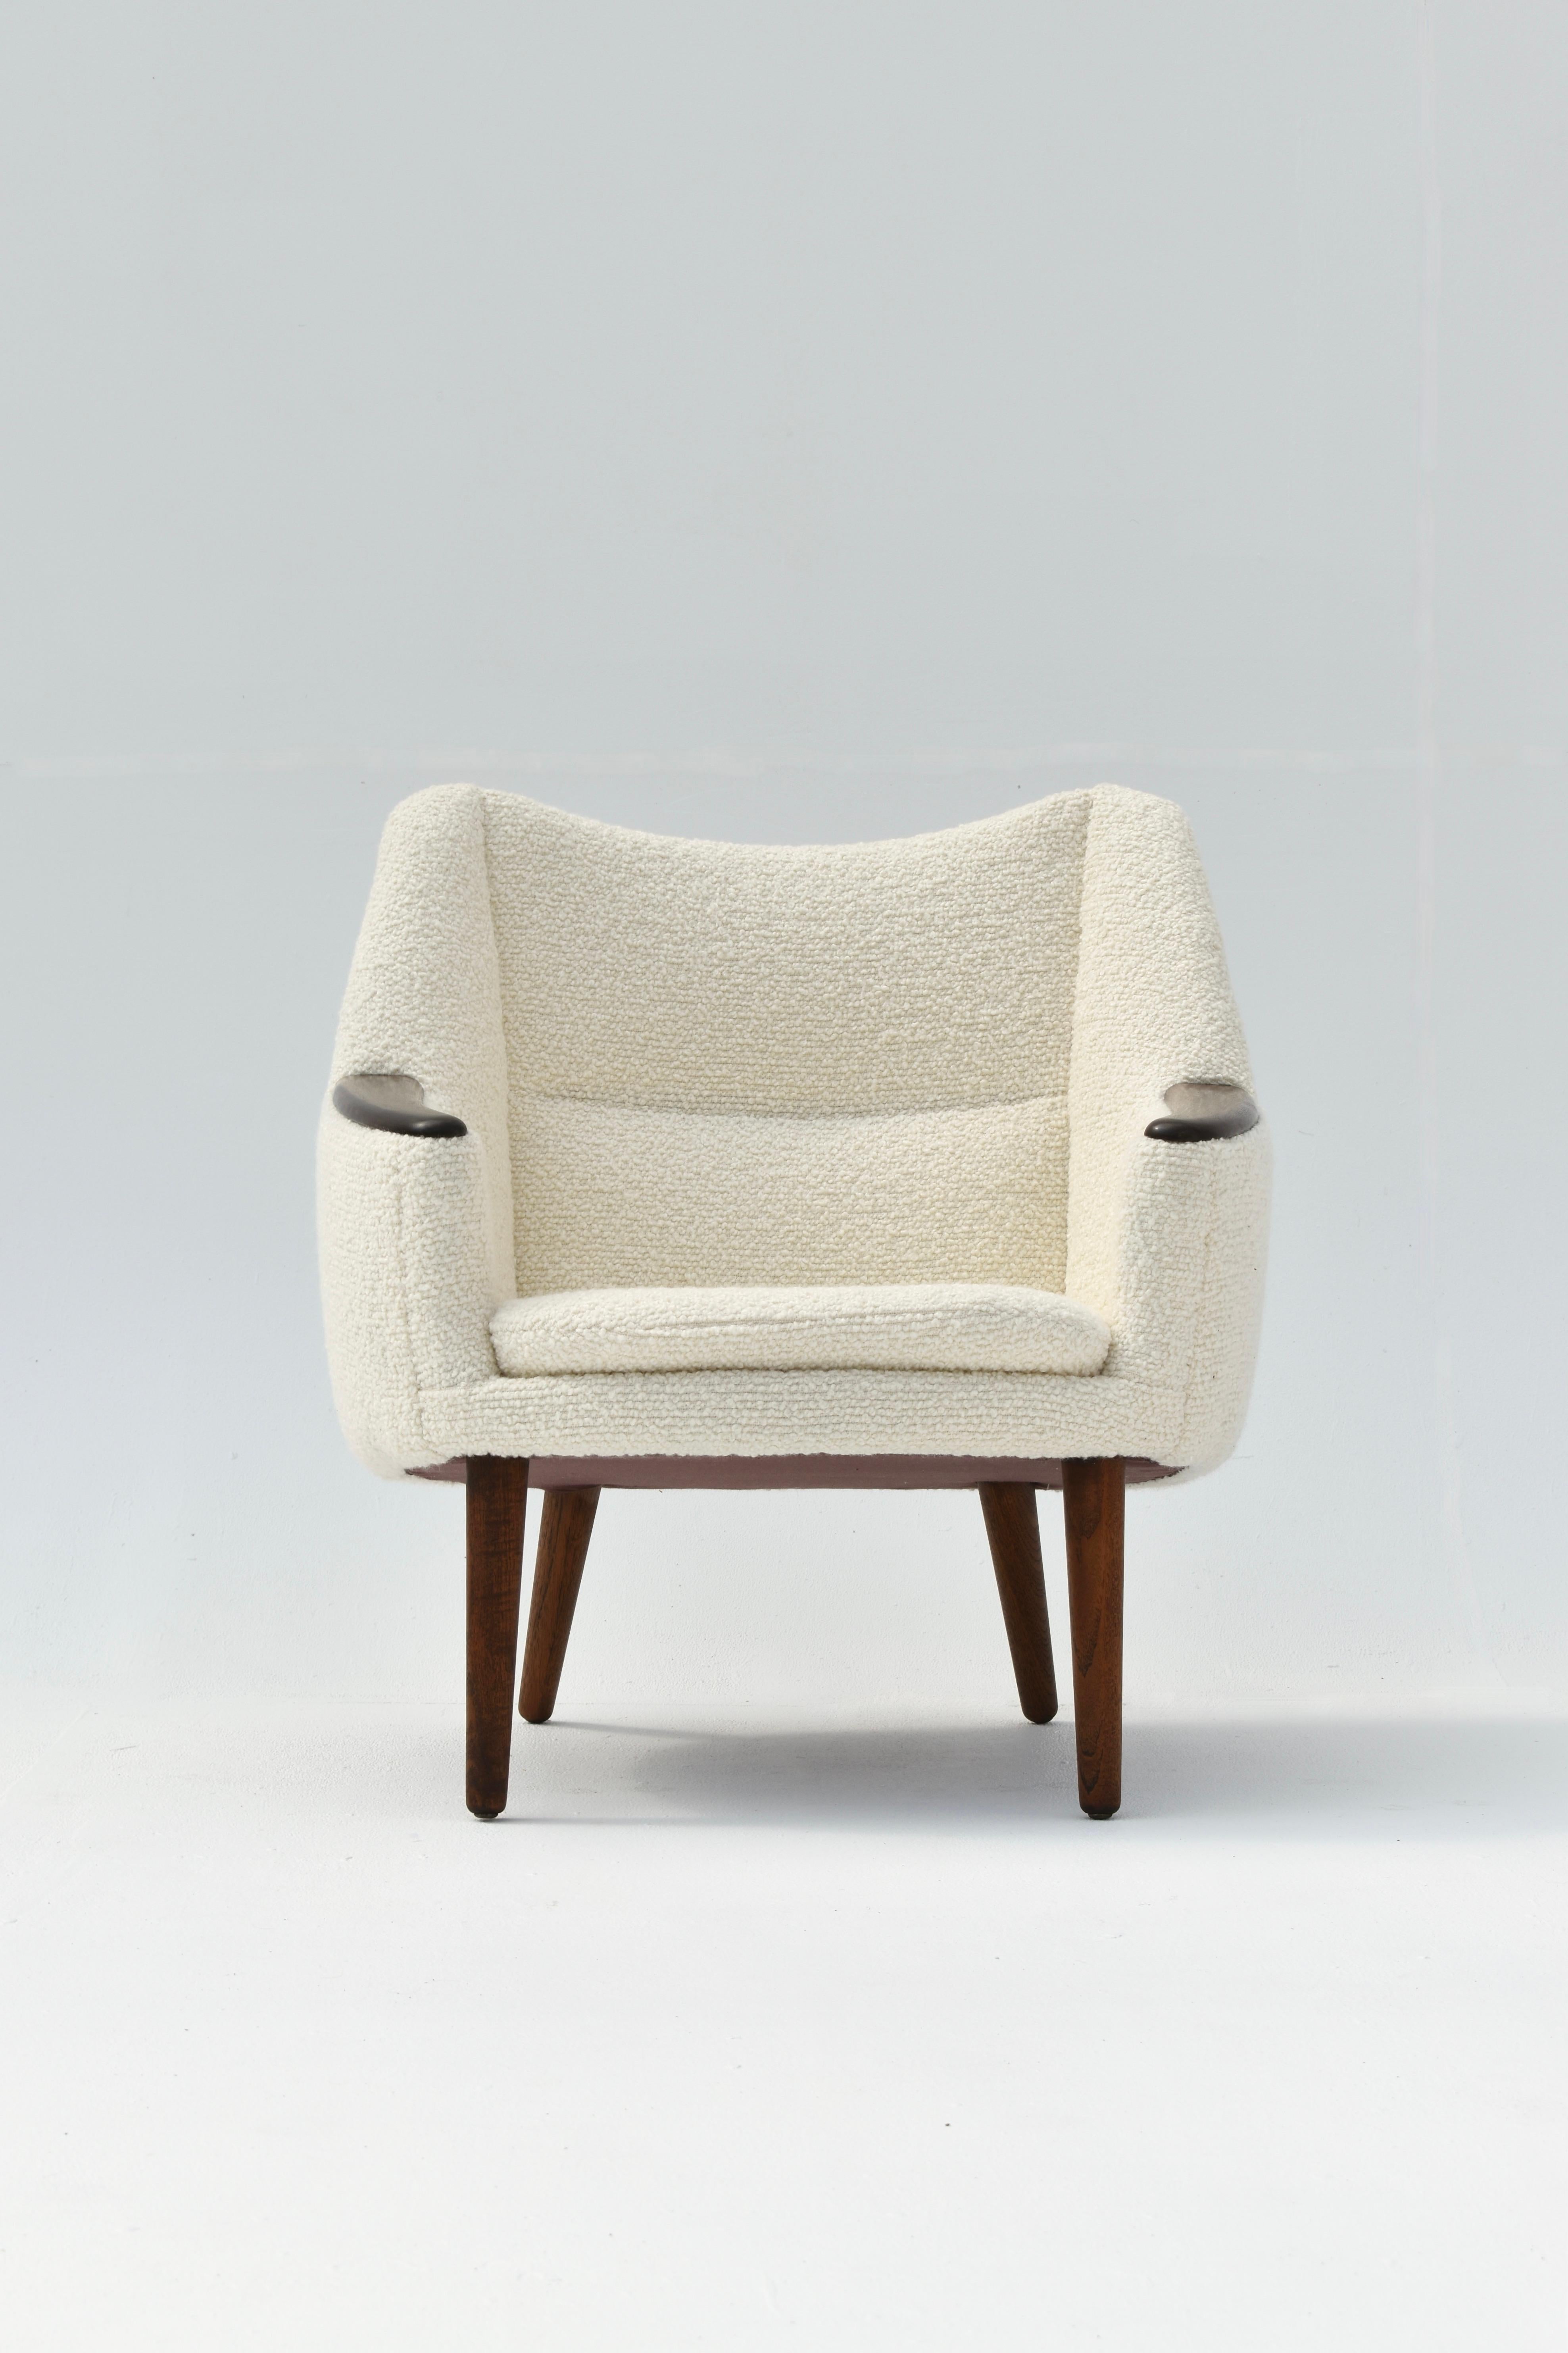 Rarely seen Model 58 lounge chair designed by Kurt Østervig in 1958 for Henry Rolschau Mobler, Denmark.

A very inviting cocoon shape frame upholstered to the highest standard in Boucle wool from Bute Fabrics, Scotland. The tactile fabric looks